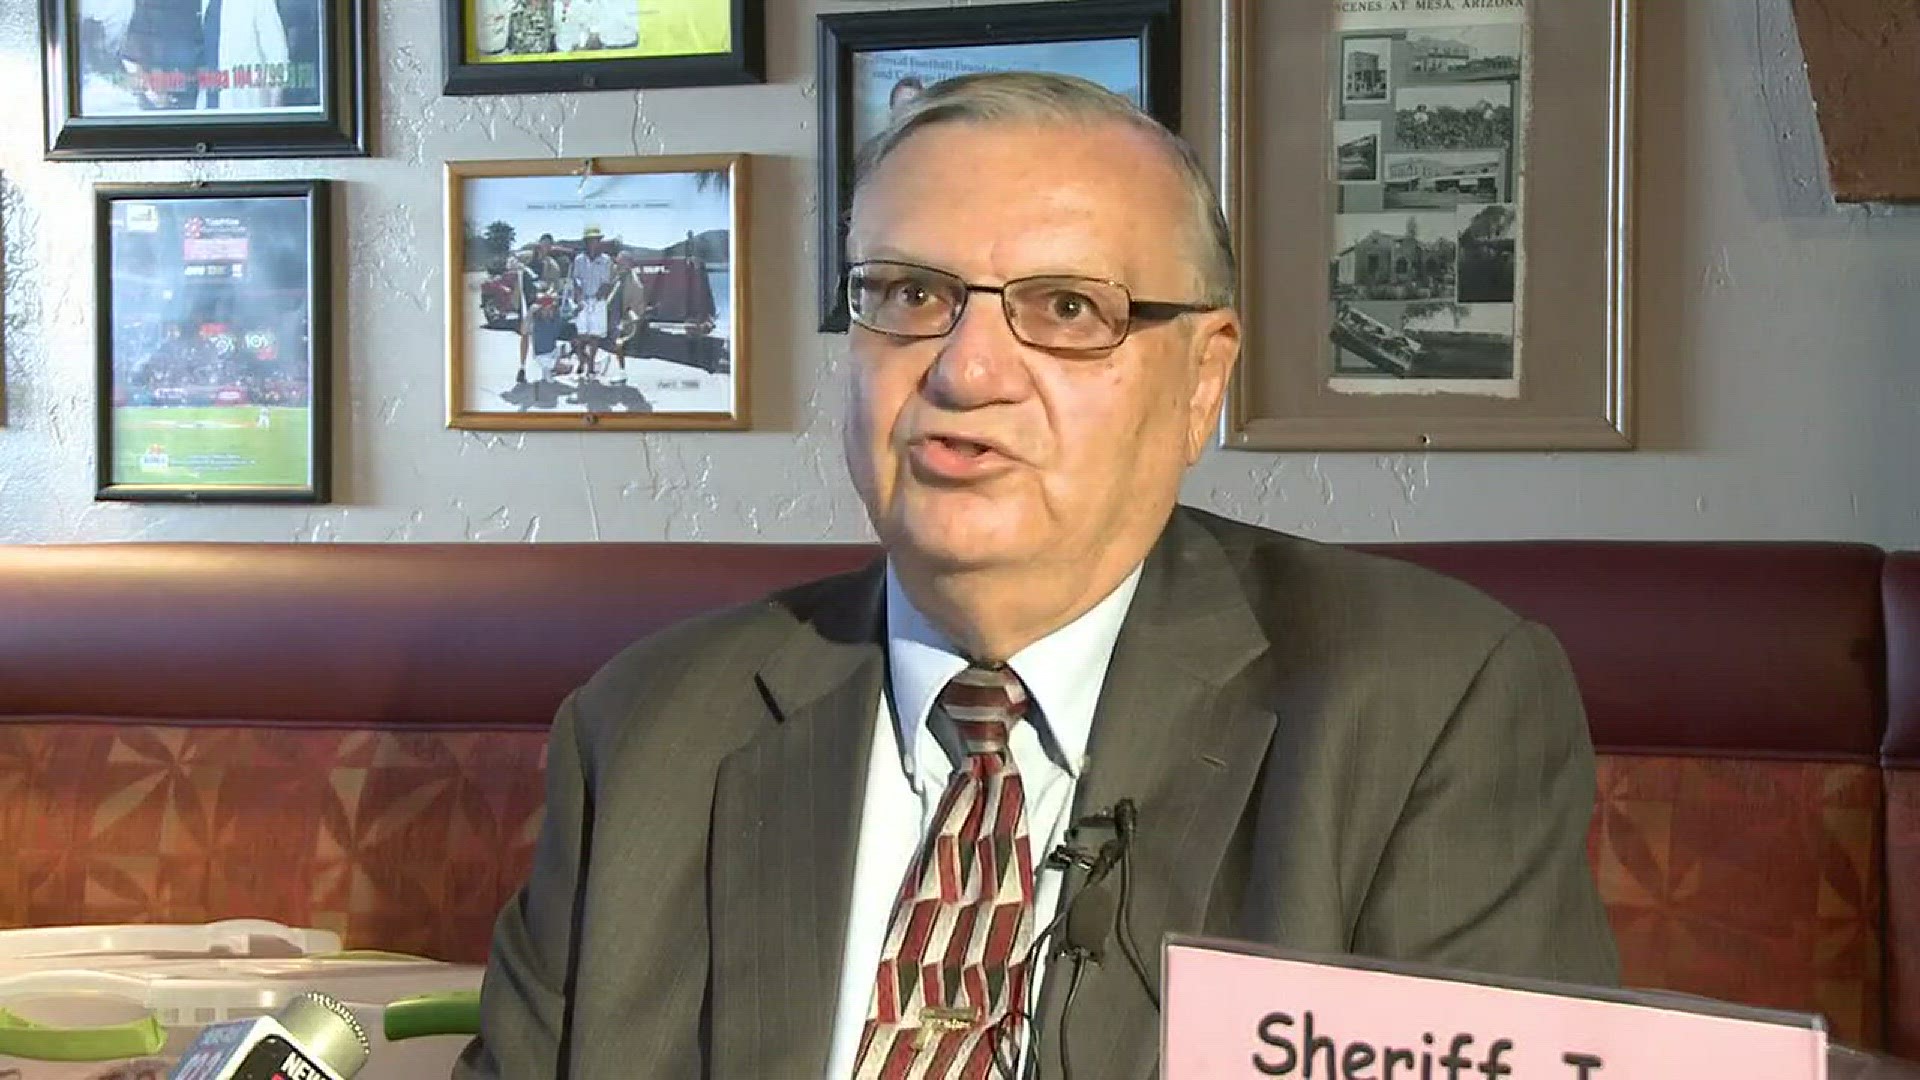 A judge has found former Maricopa County Sheriff Joe Arpaio guilty of criminal contempt.